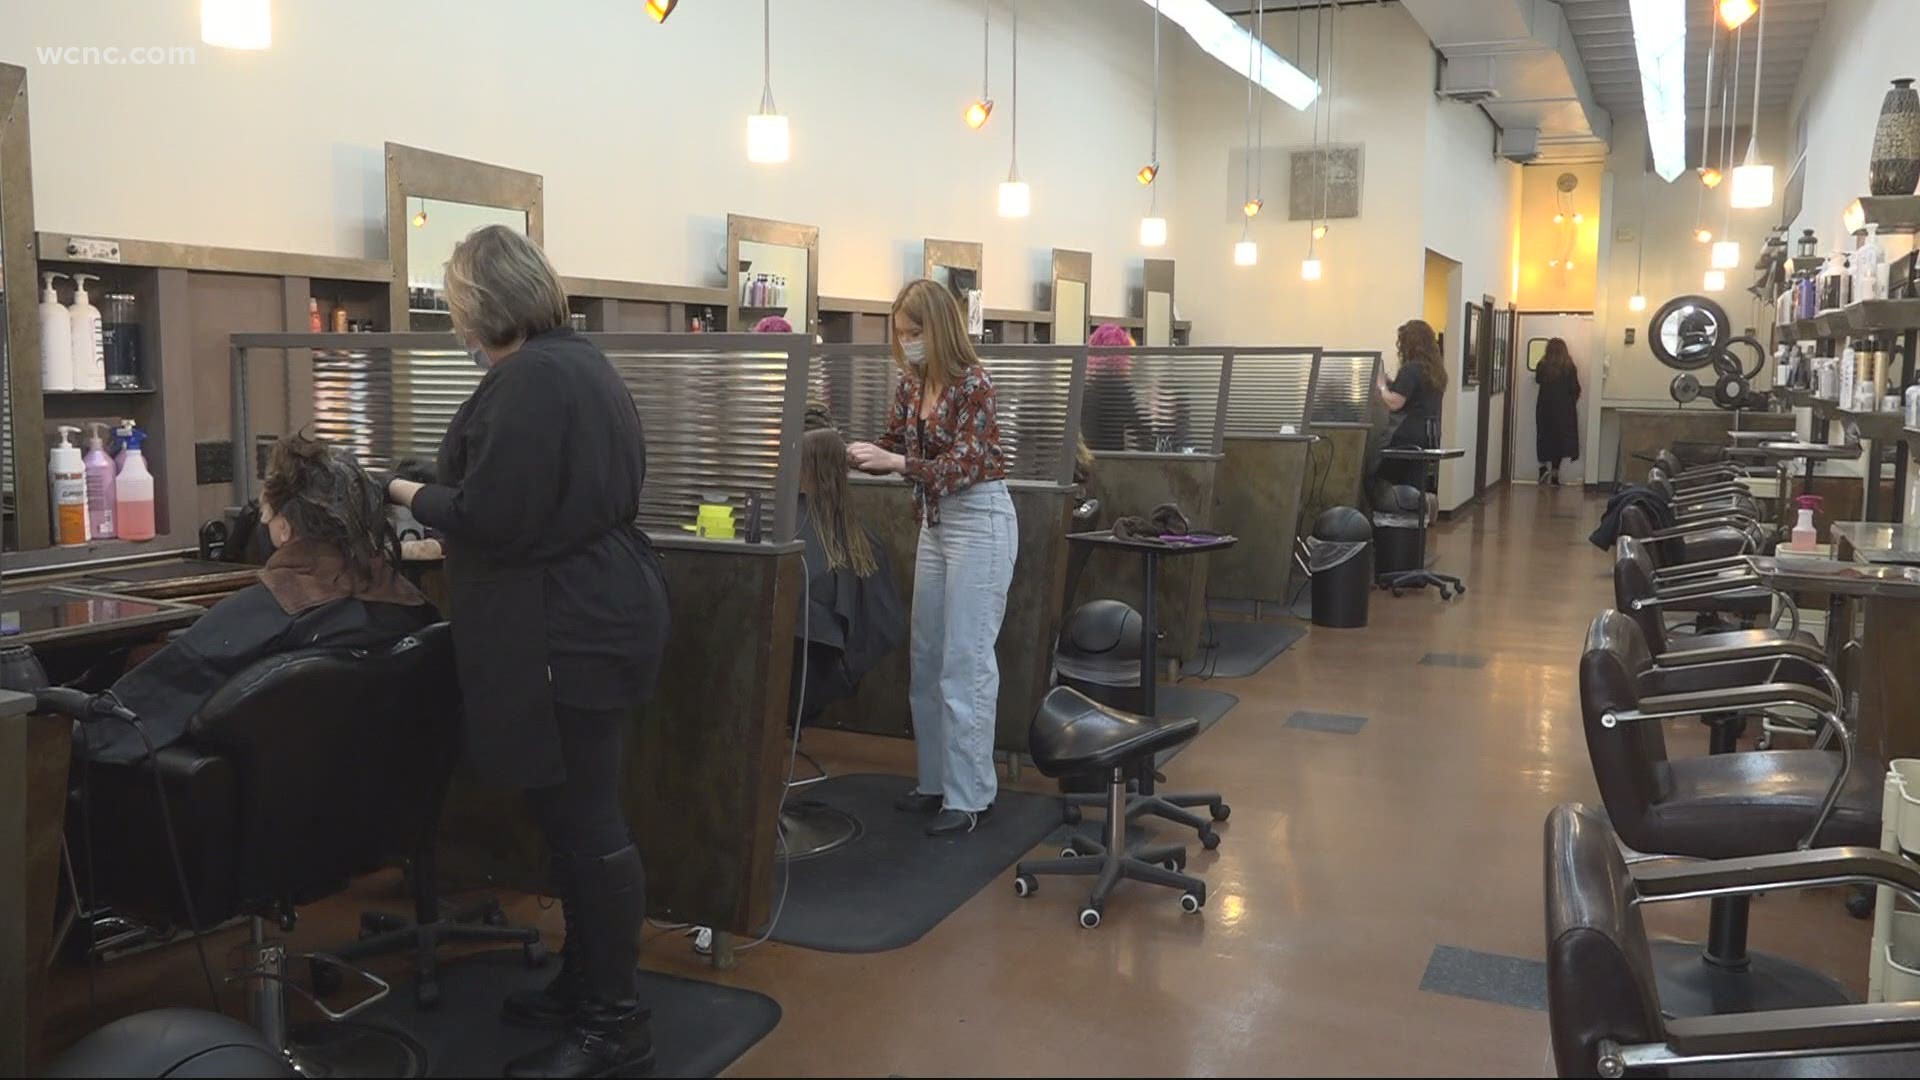 This salon made it through one of the toughest years in business.